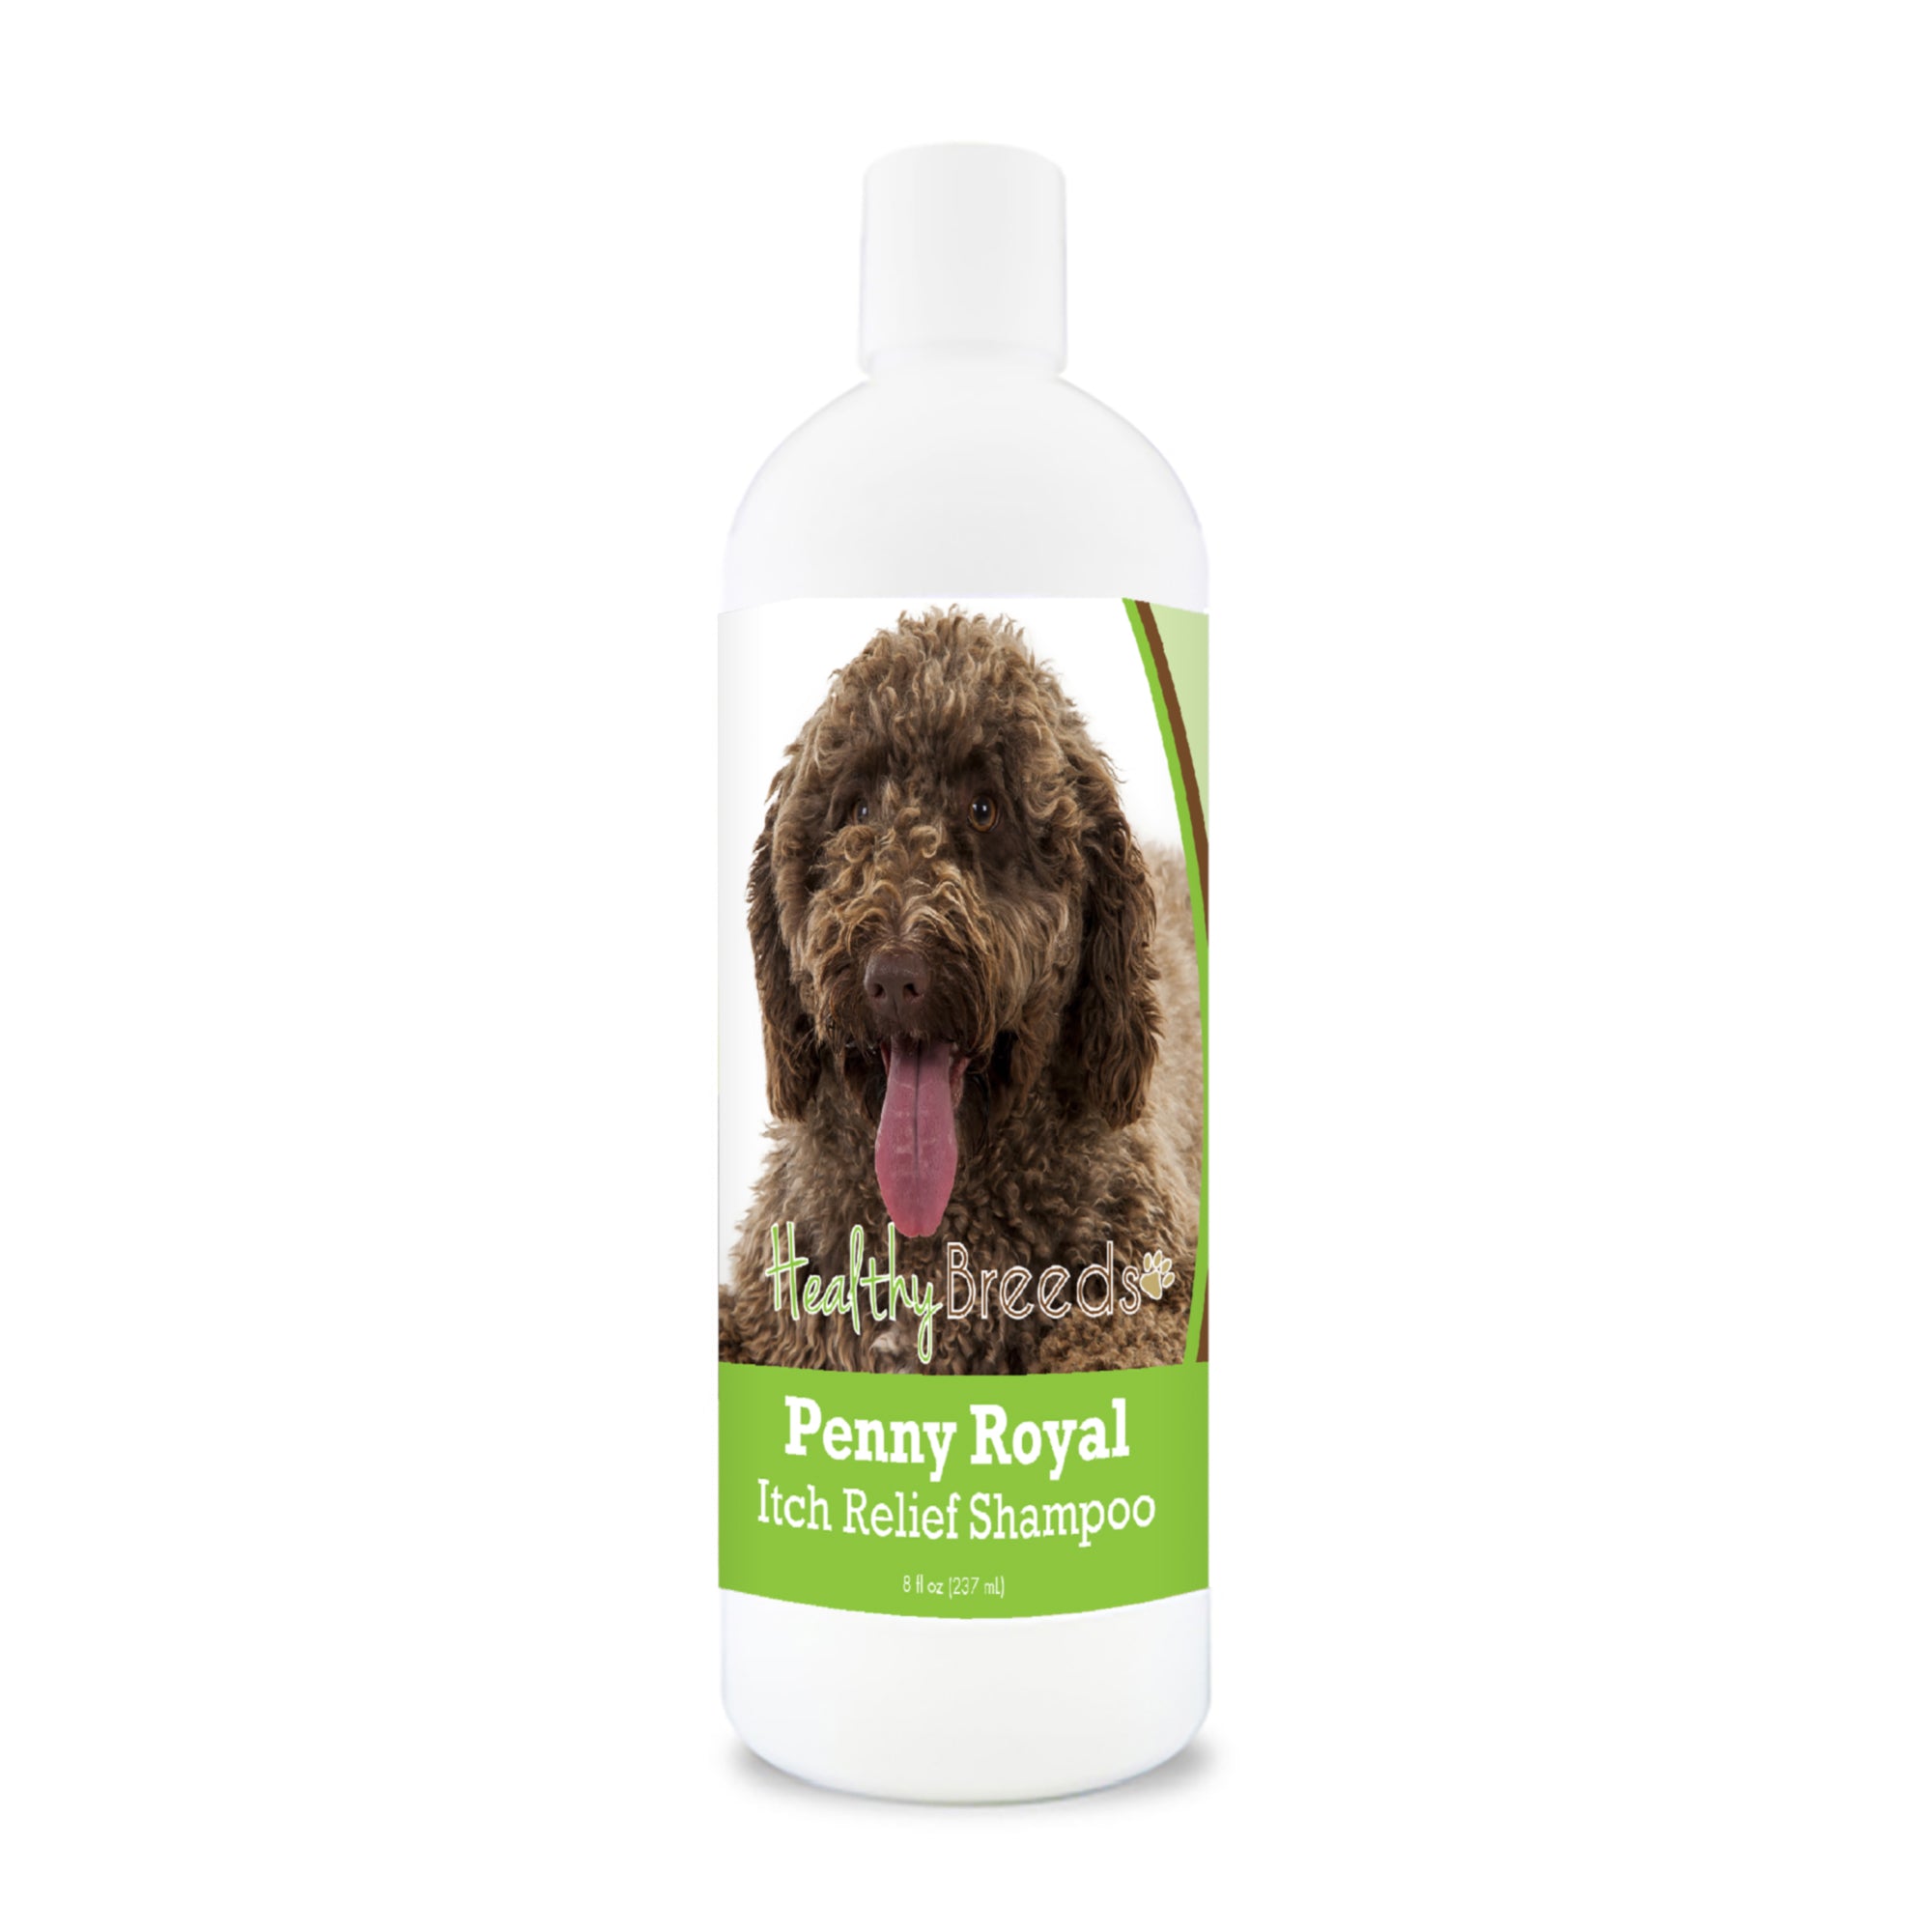 Spanish Water Dog Penny Royal Itch Relief Shampoo 8 oz